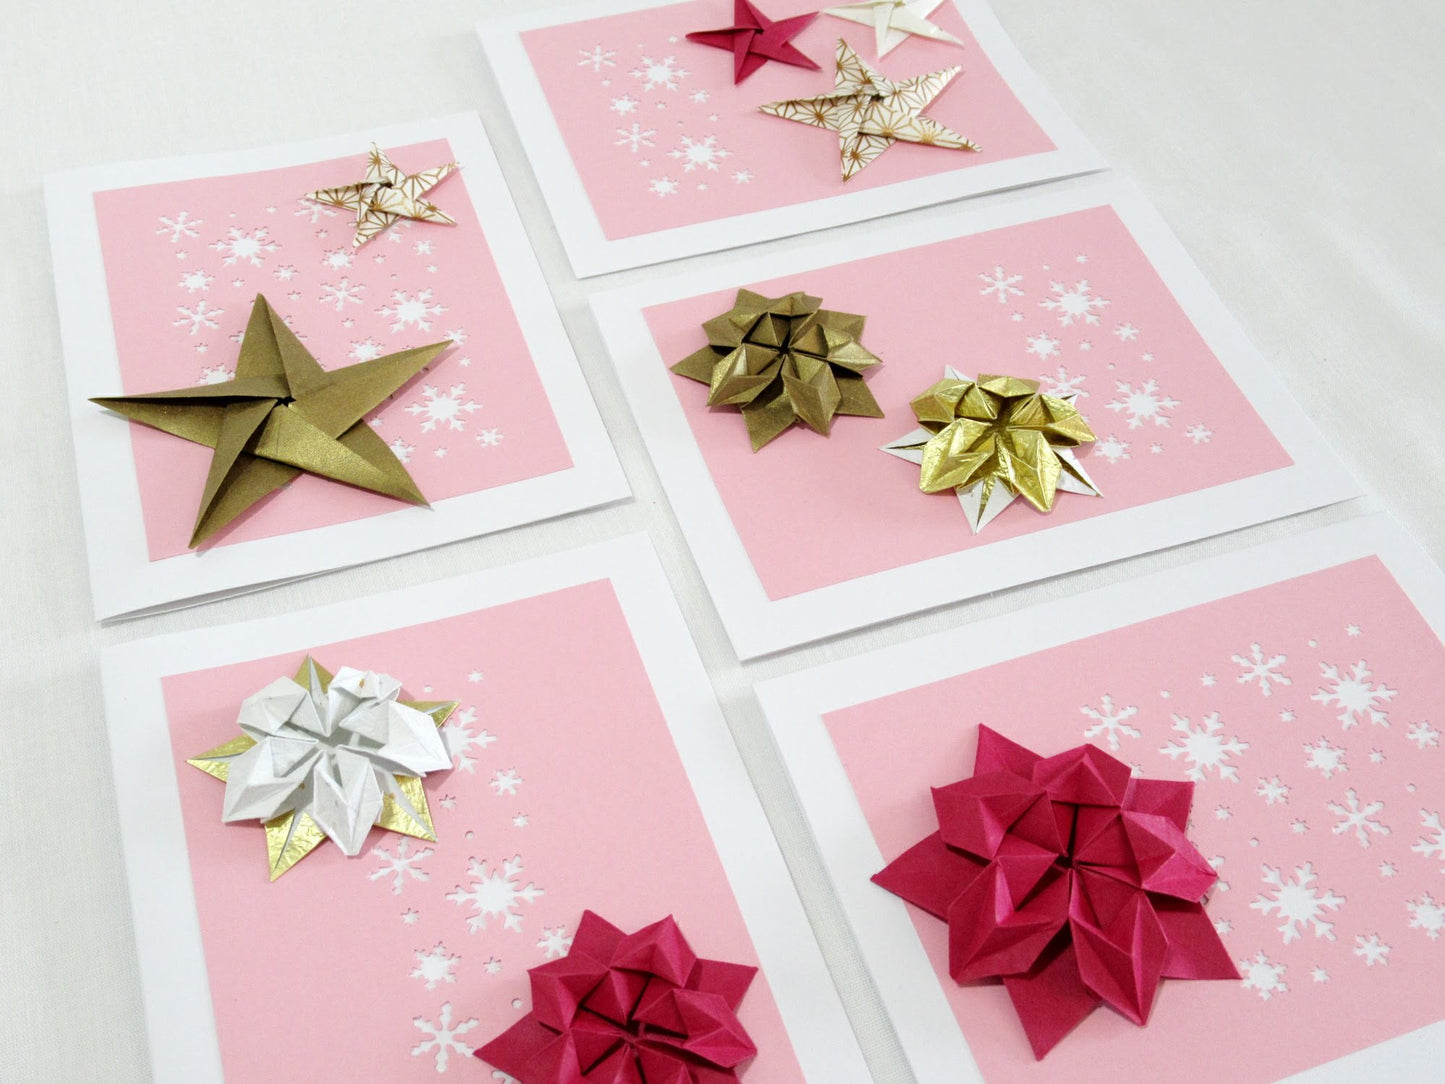 Set of five white cards. Each card has a pink background with white snowflakes. On top are a variety of origami stars in gold, white, and pink.